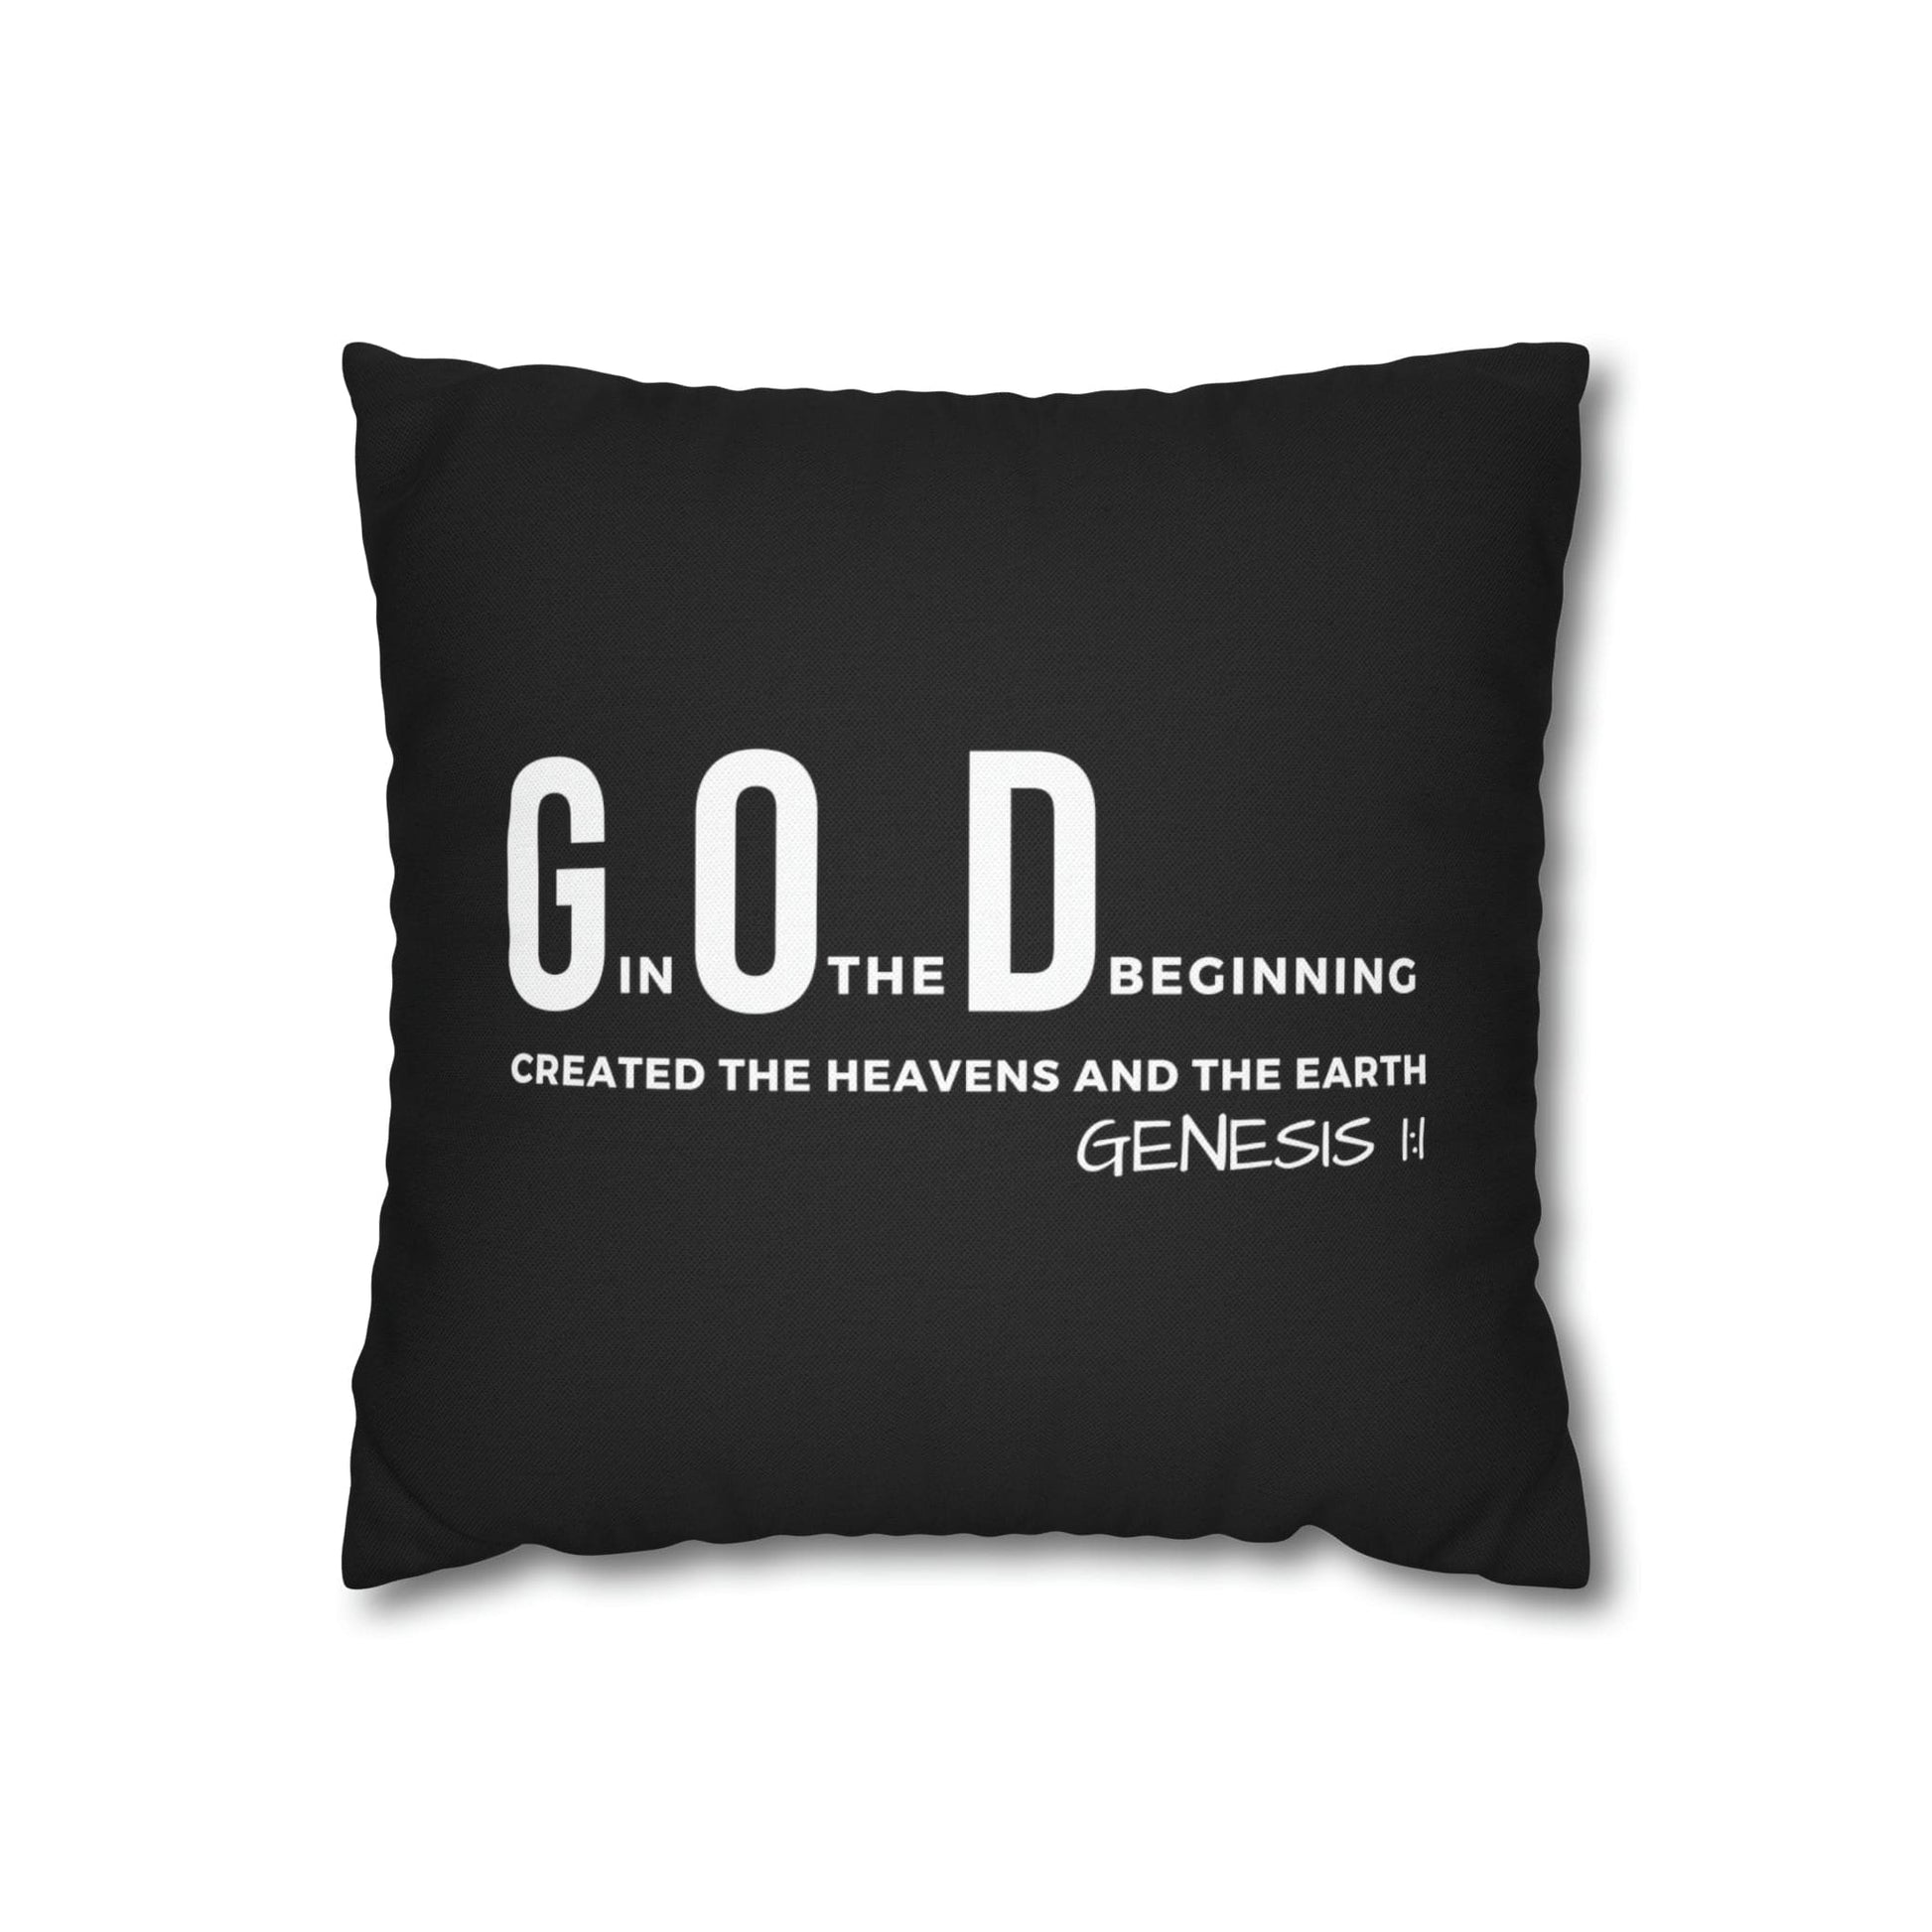 Decorative Throw Pillow Cover - Set Of 2, God In The Beginning Created The Heavens And The Earth - Scripture Verse-1